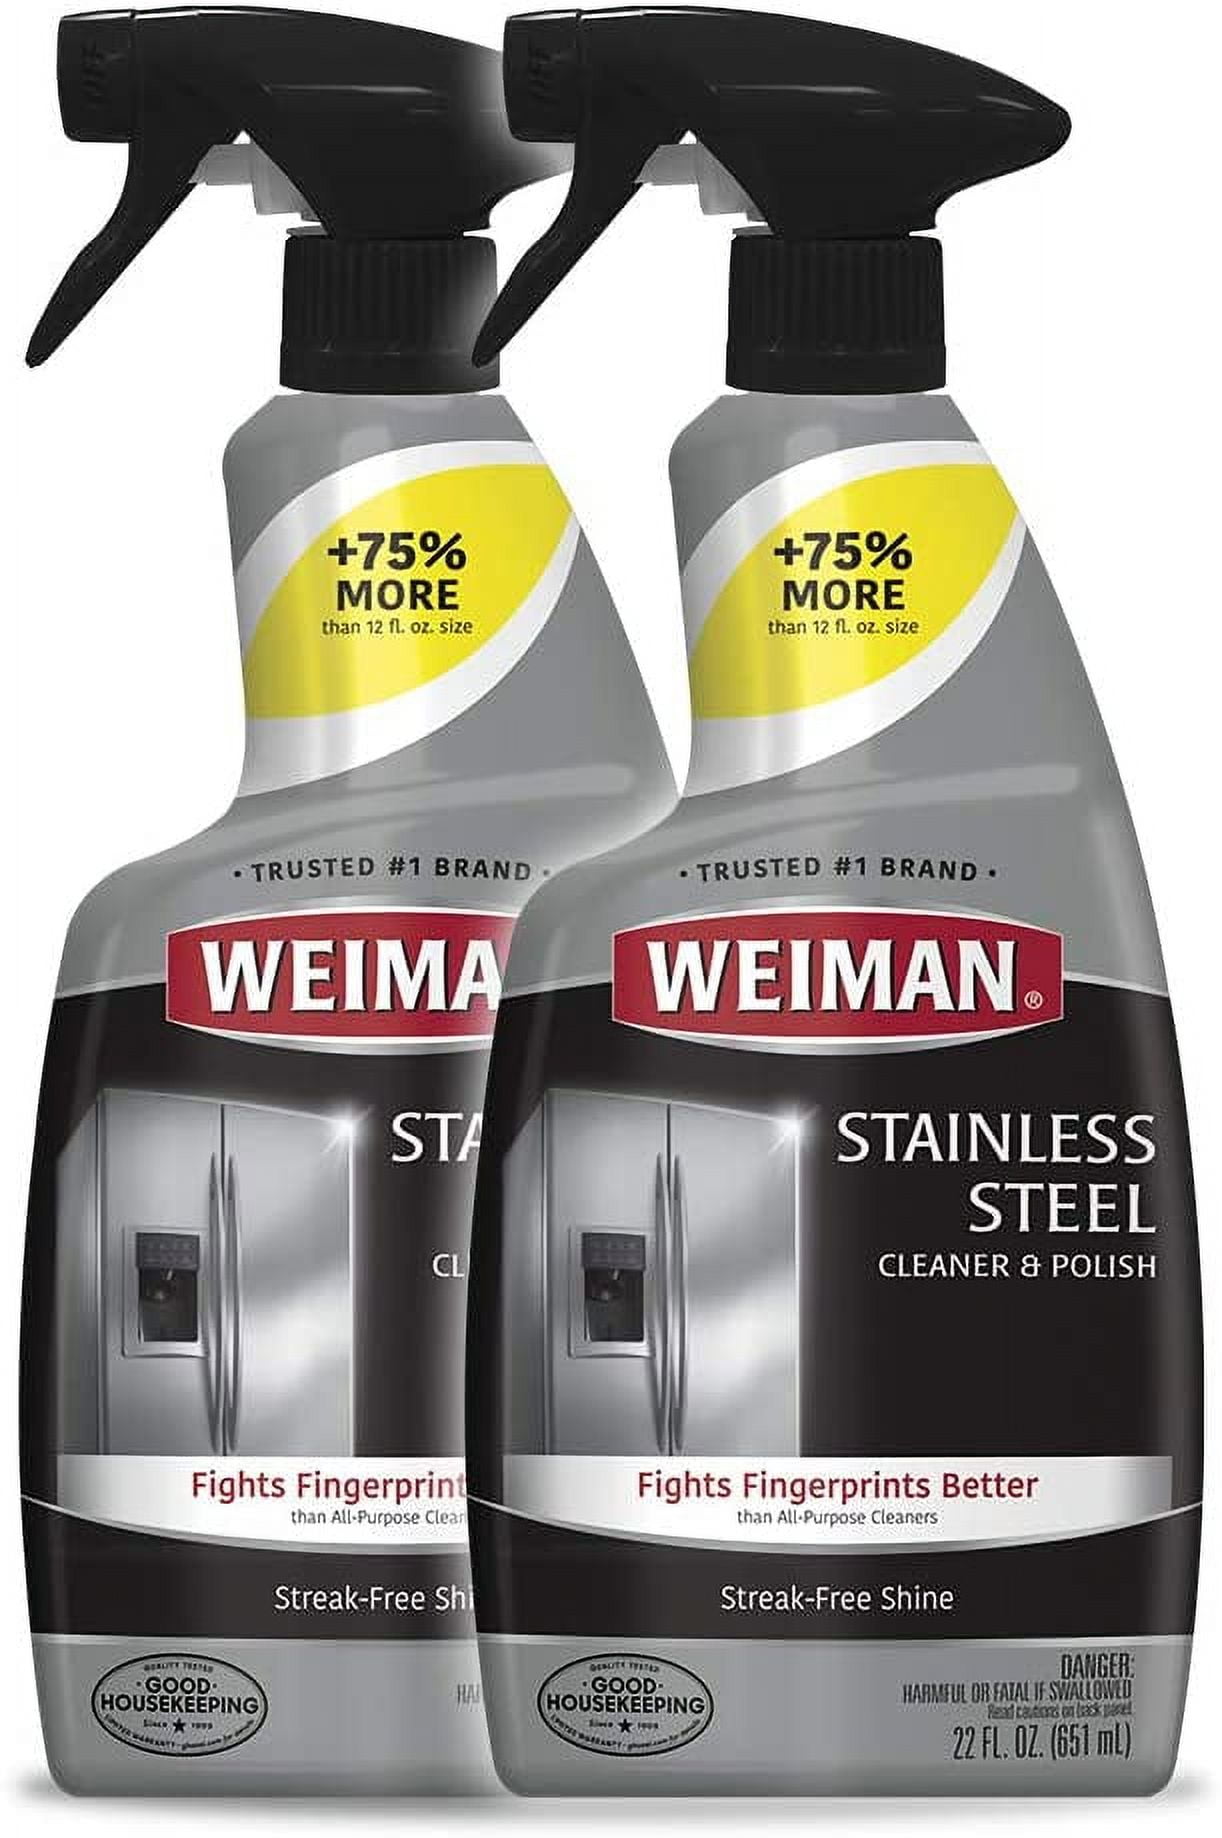  Weiman Stainless Steel Cleaner & Polish 22 fl oz - 6 pack :  Health & Household